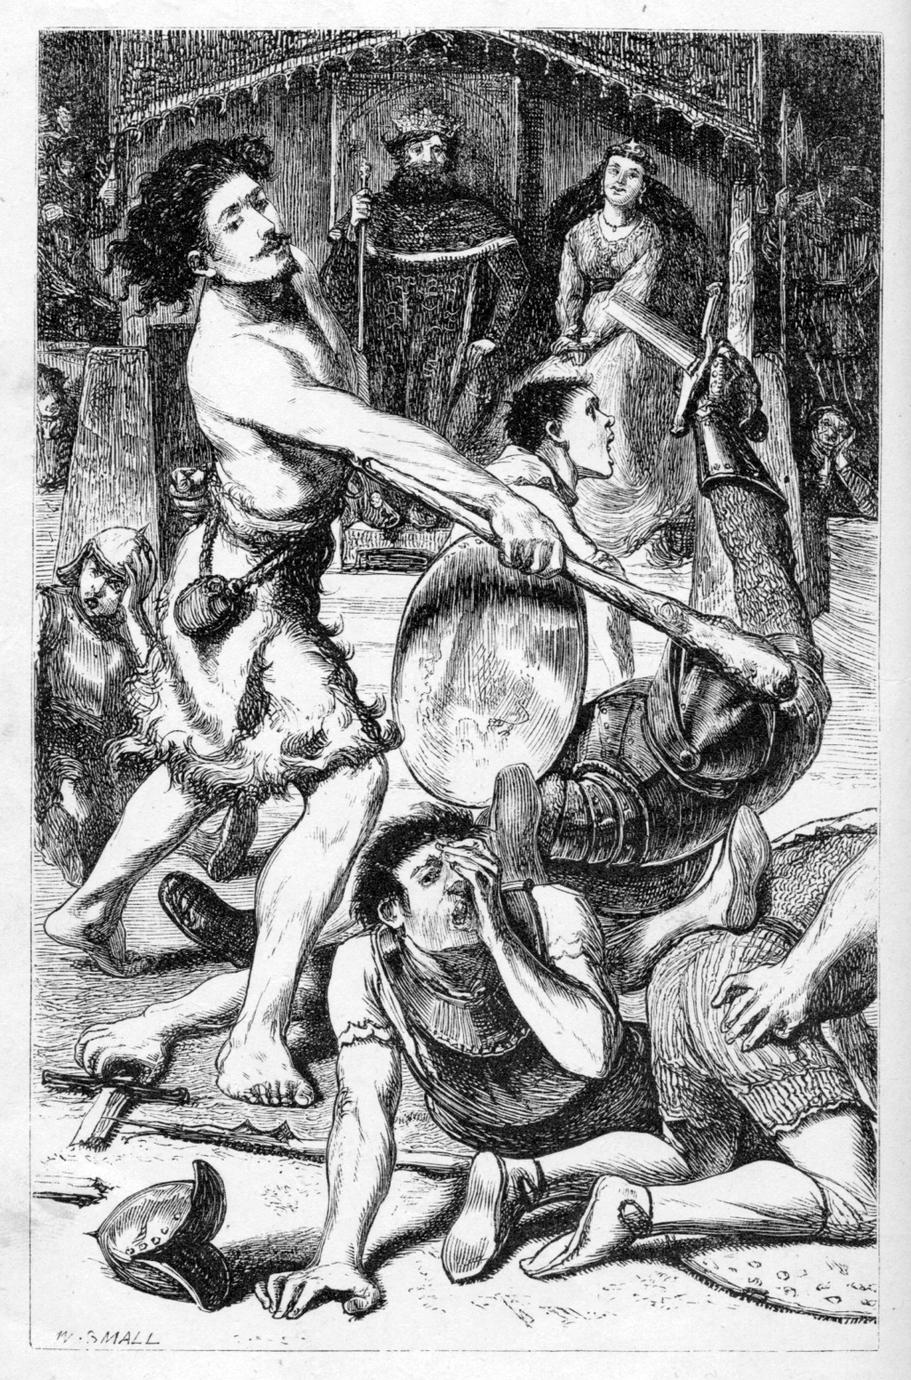 Illustration of men fighting with clubs and swords in front of a king and queen